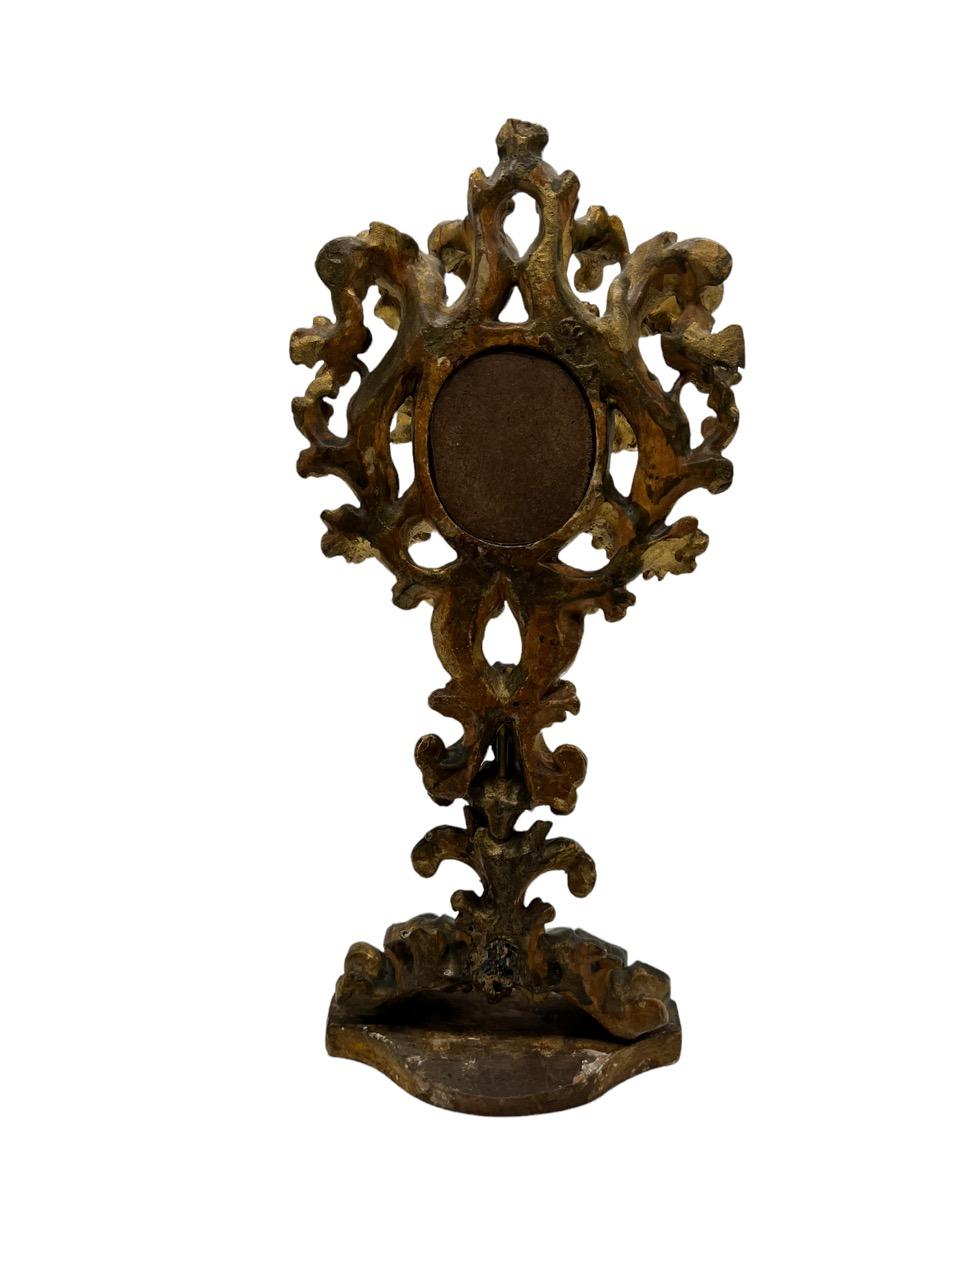 Opulent 18th Century Baroque Reliquary of Blood of Saint St. Francis '15th Cent' 2